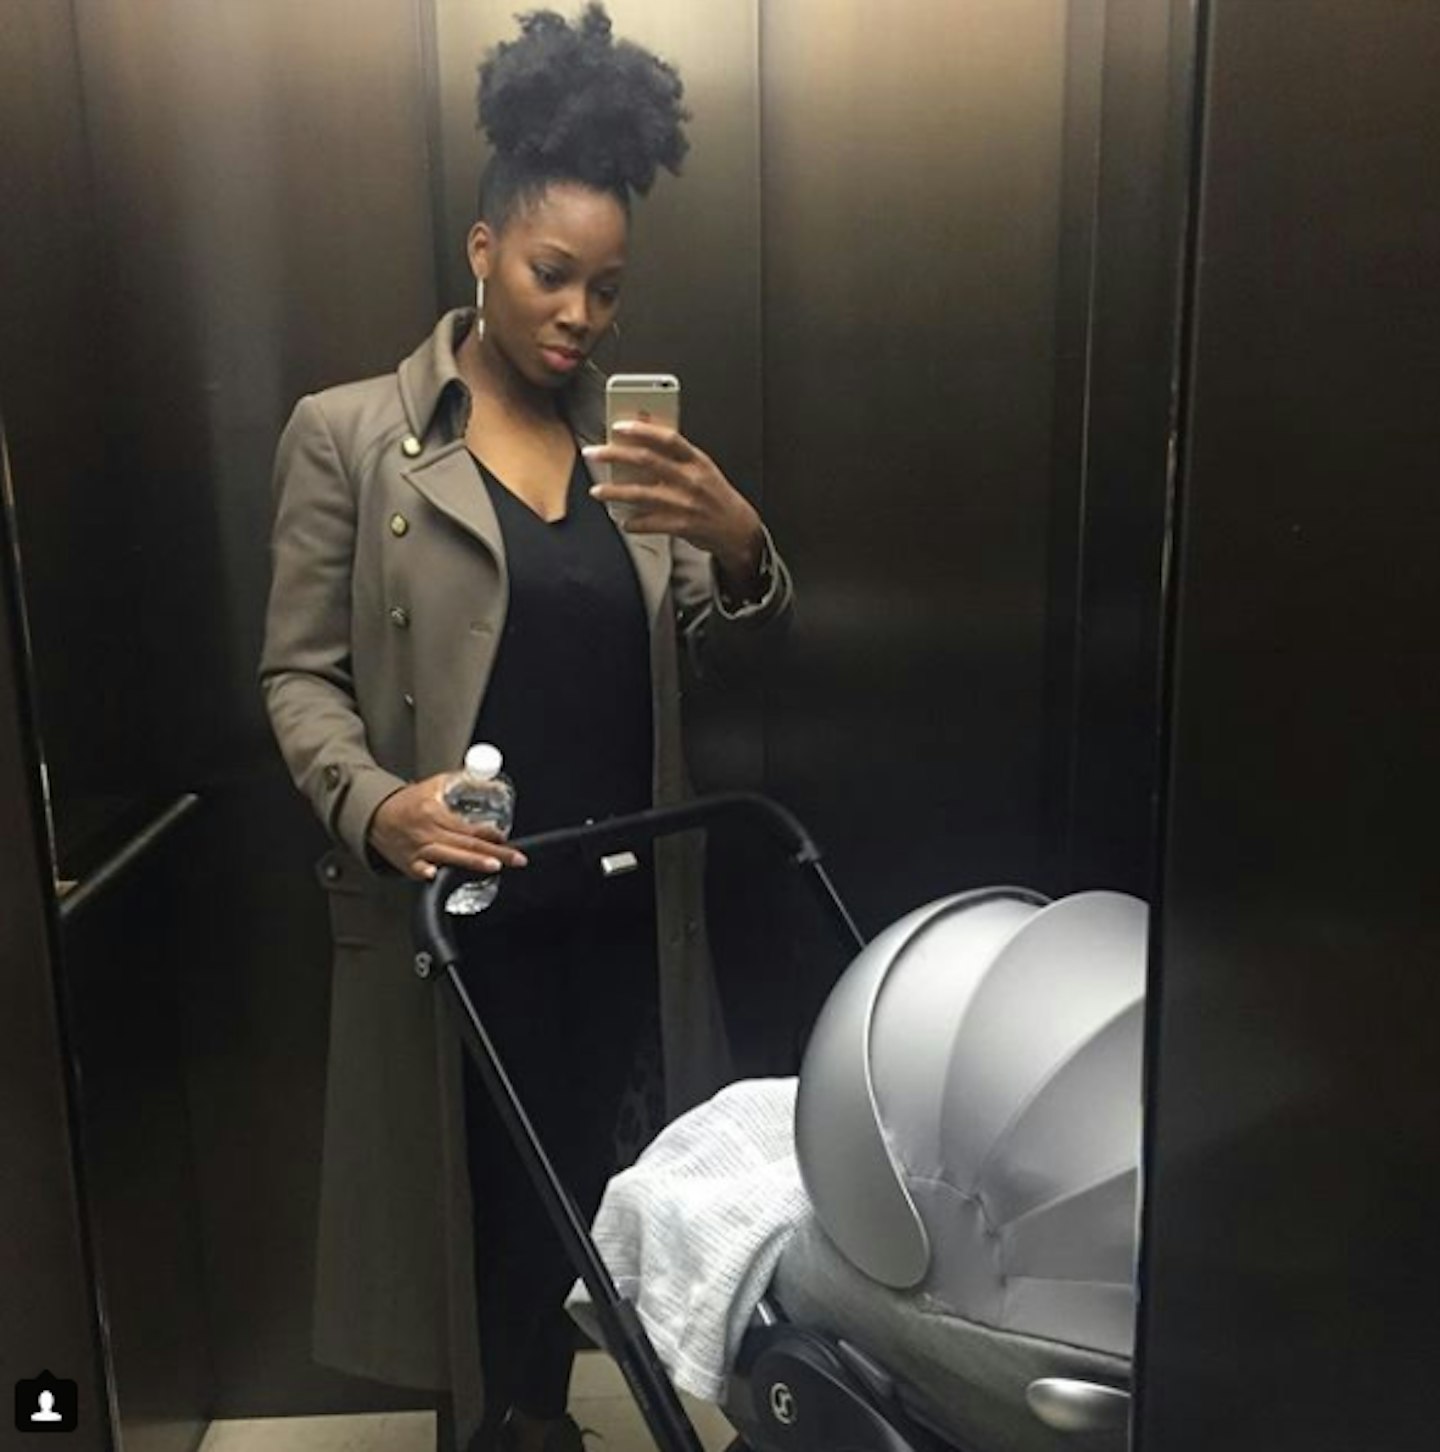 Jamelia with pushchair in lift